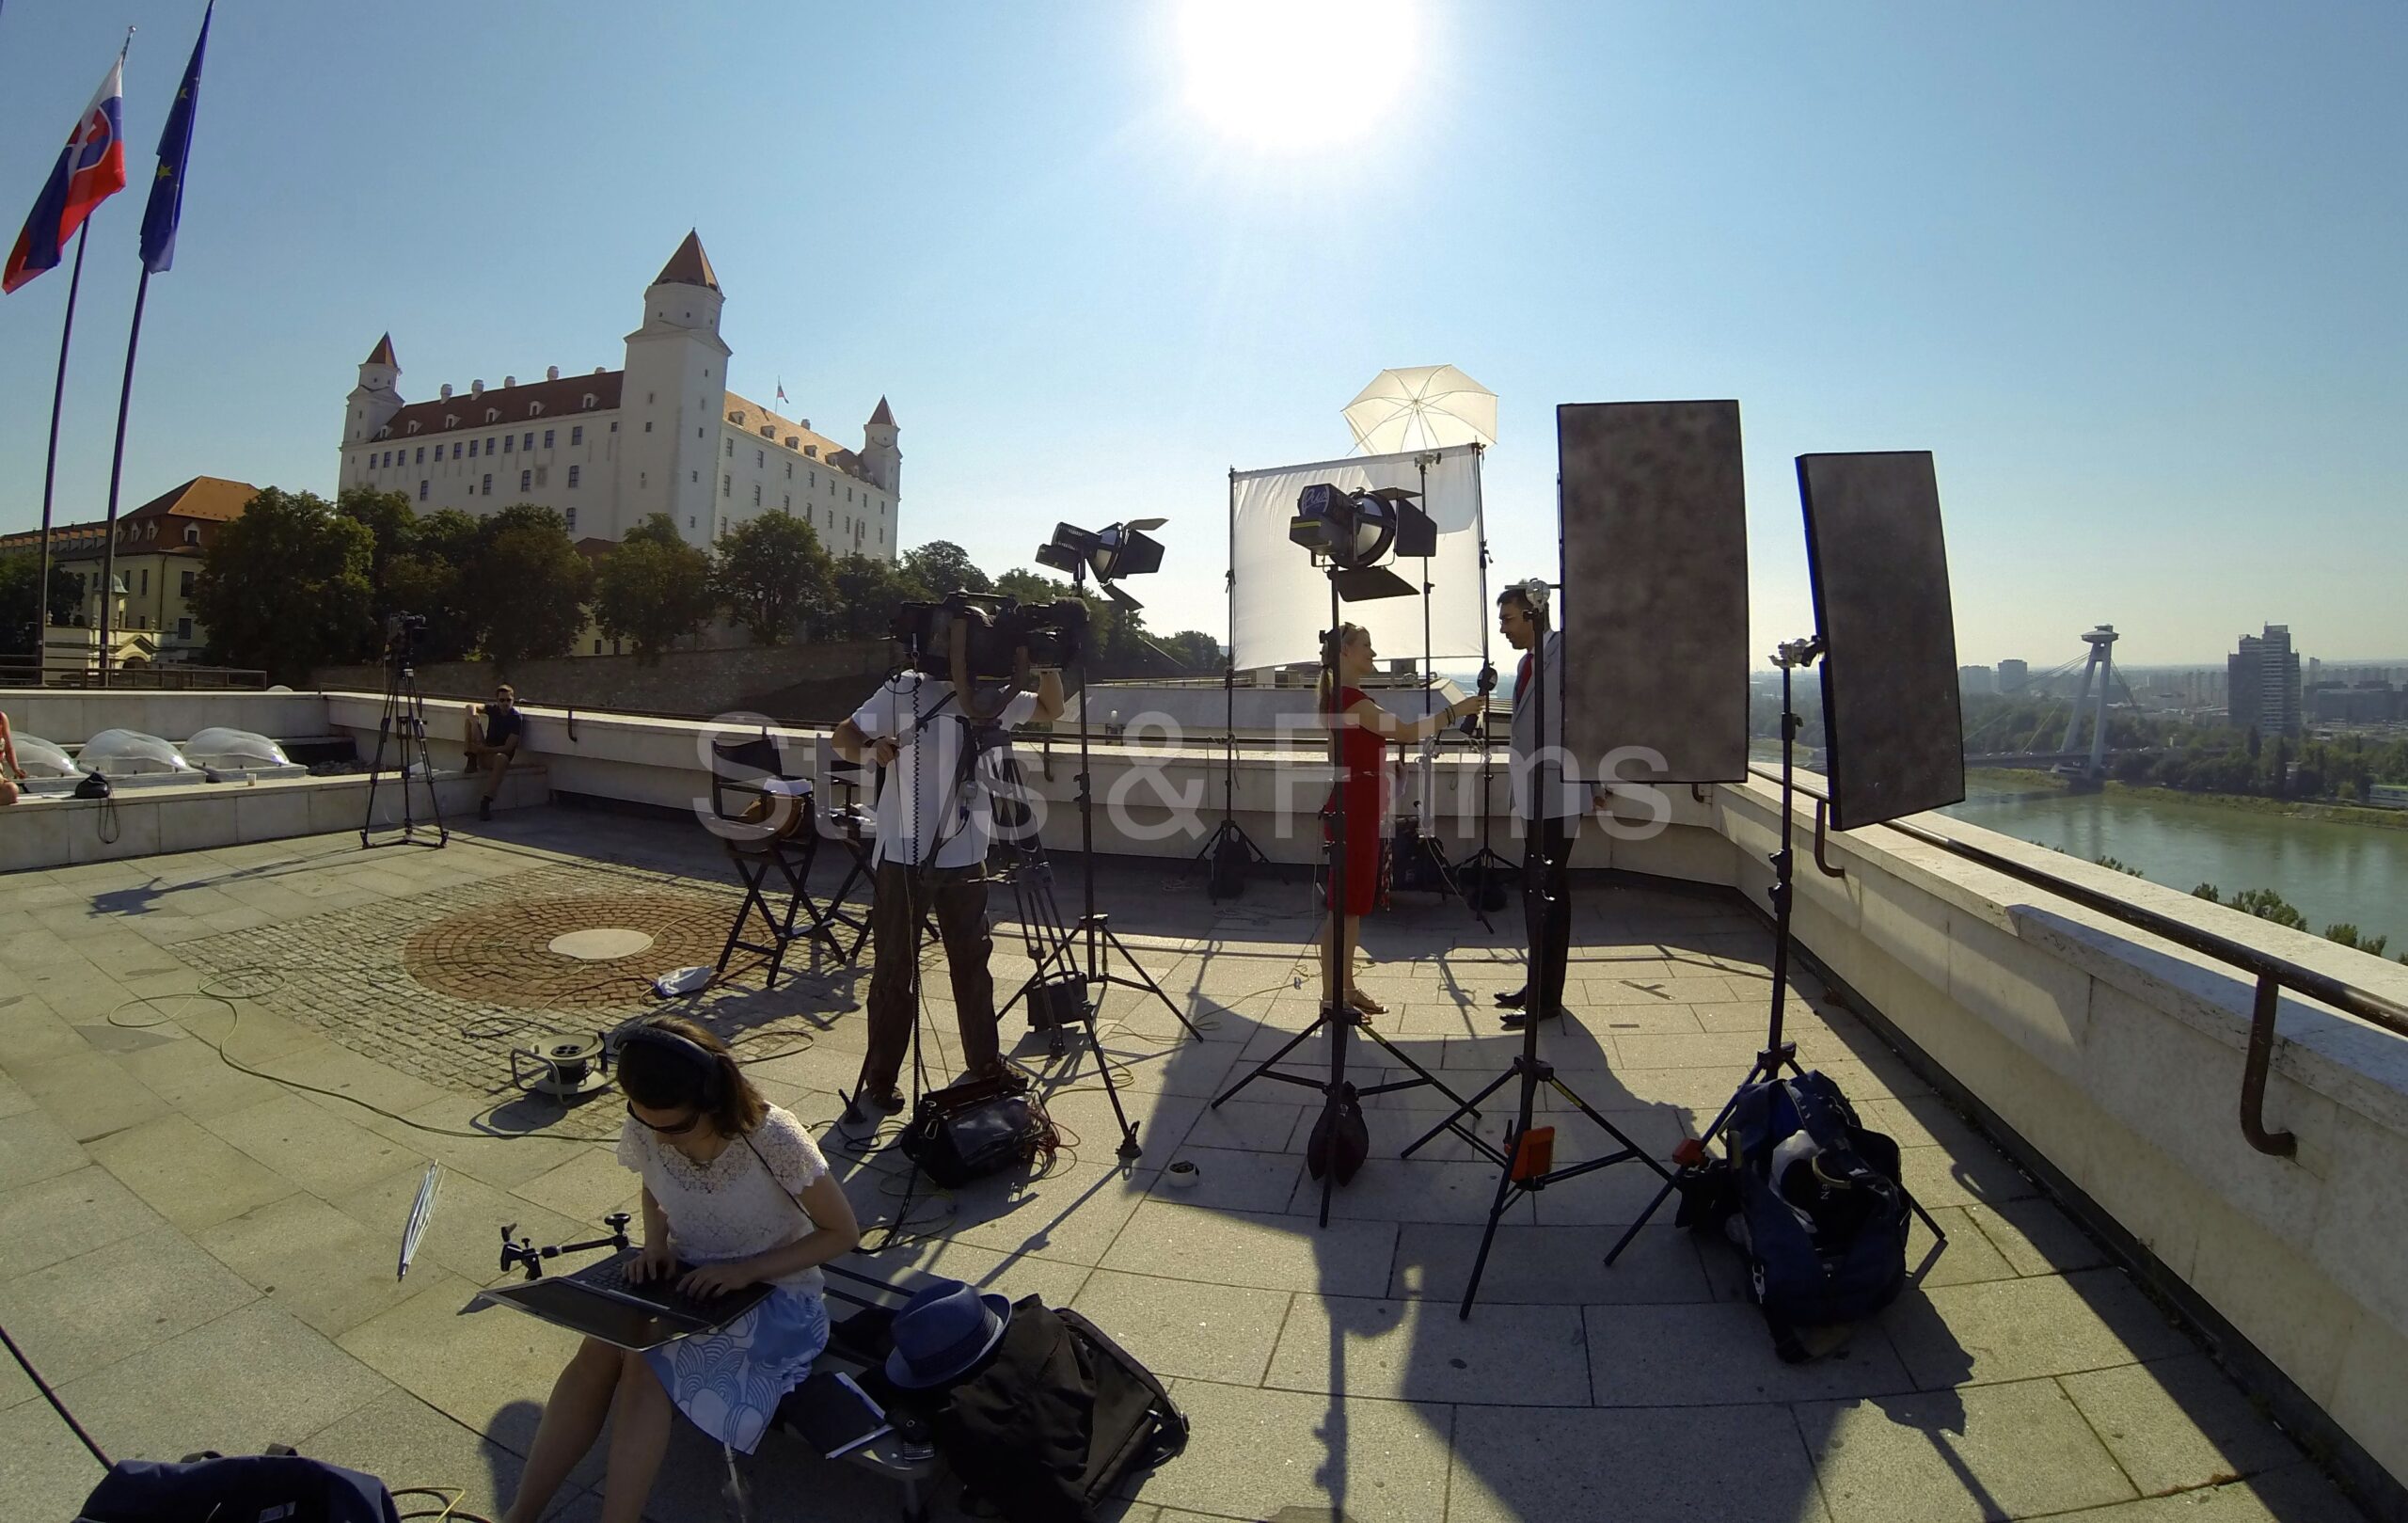 LIve broadcasting for CNBC from the Bratislava Fortress